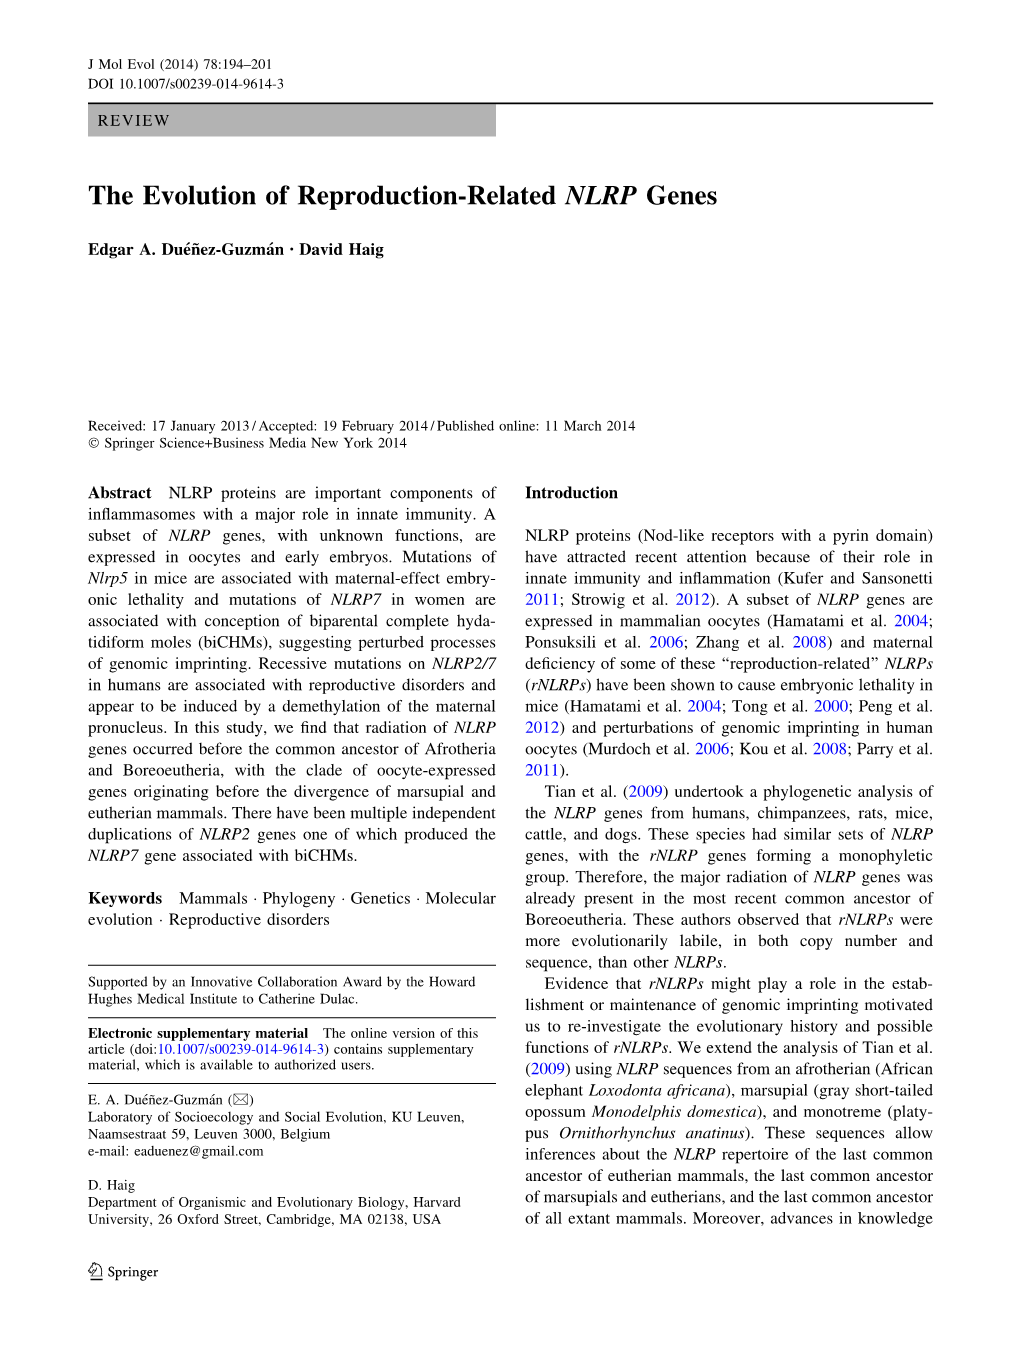 The Evolution of Reproduction-Related NLRP Genes